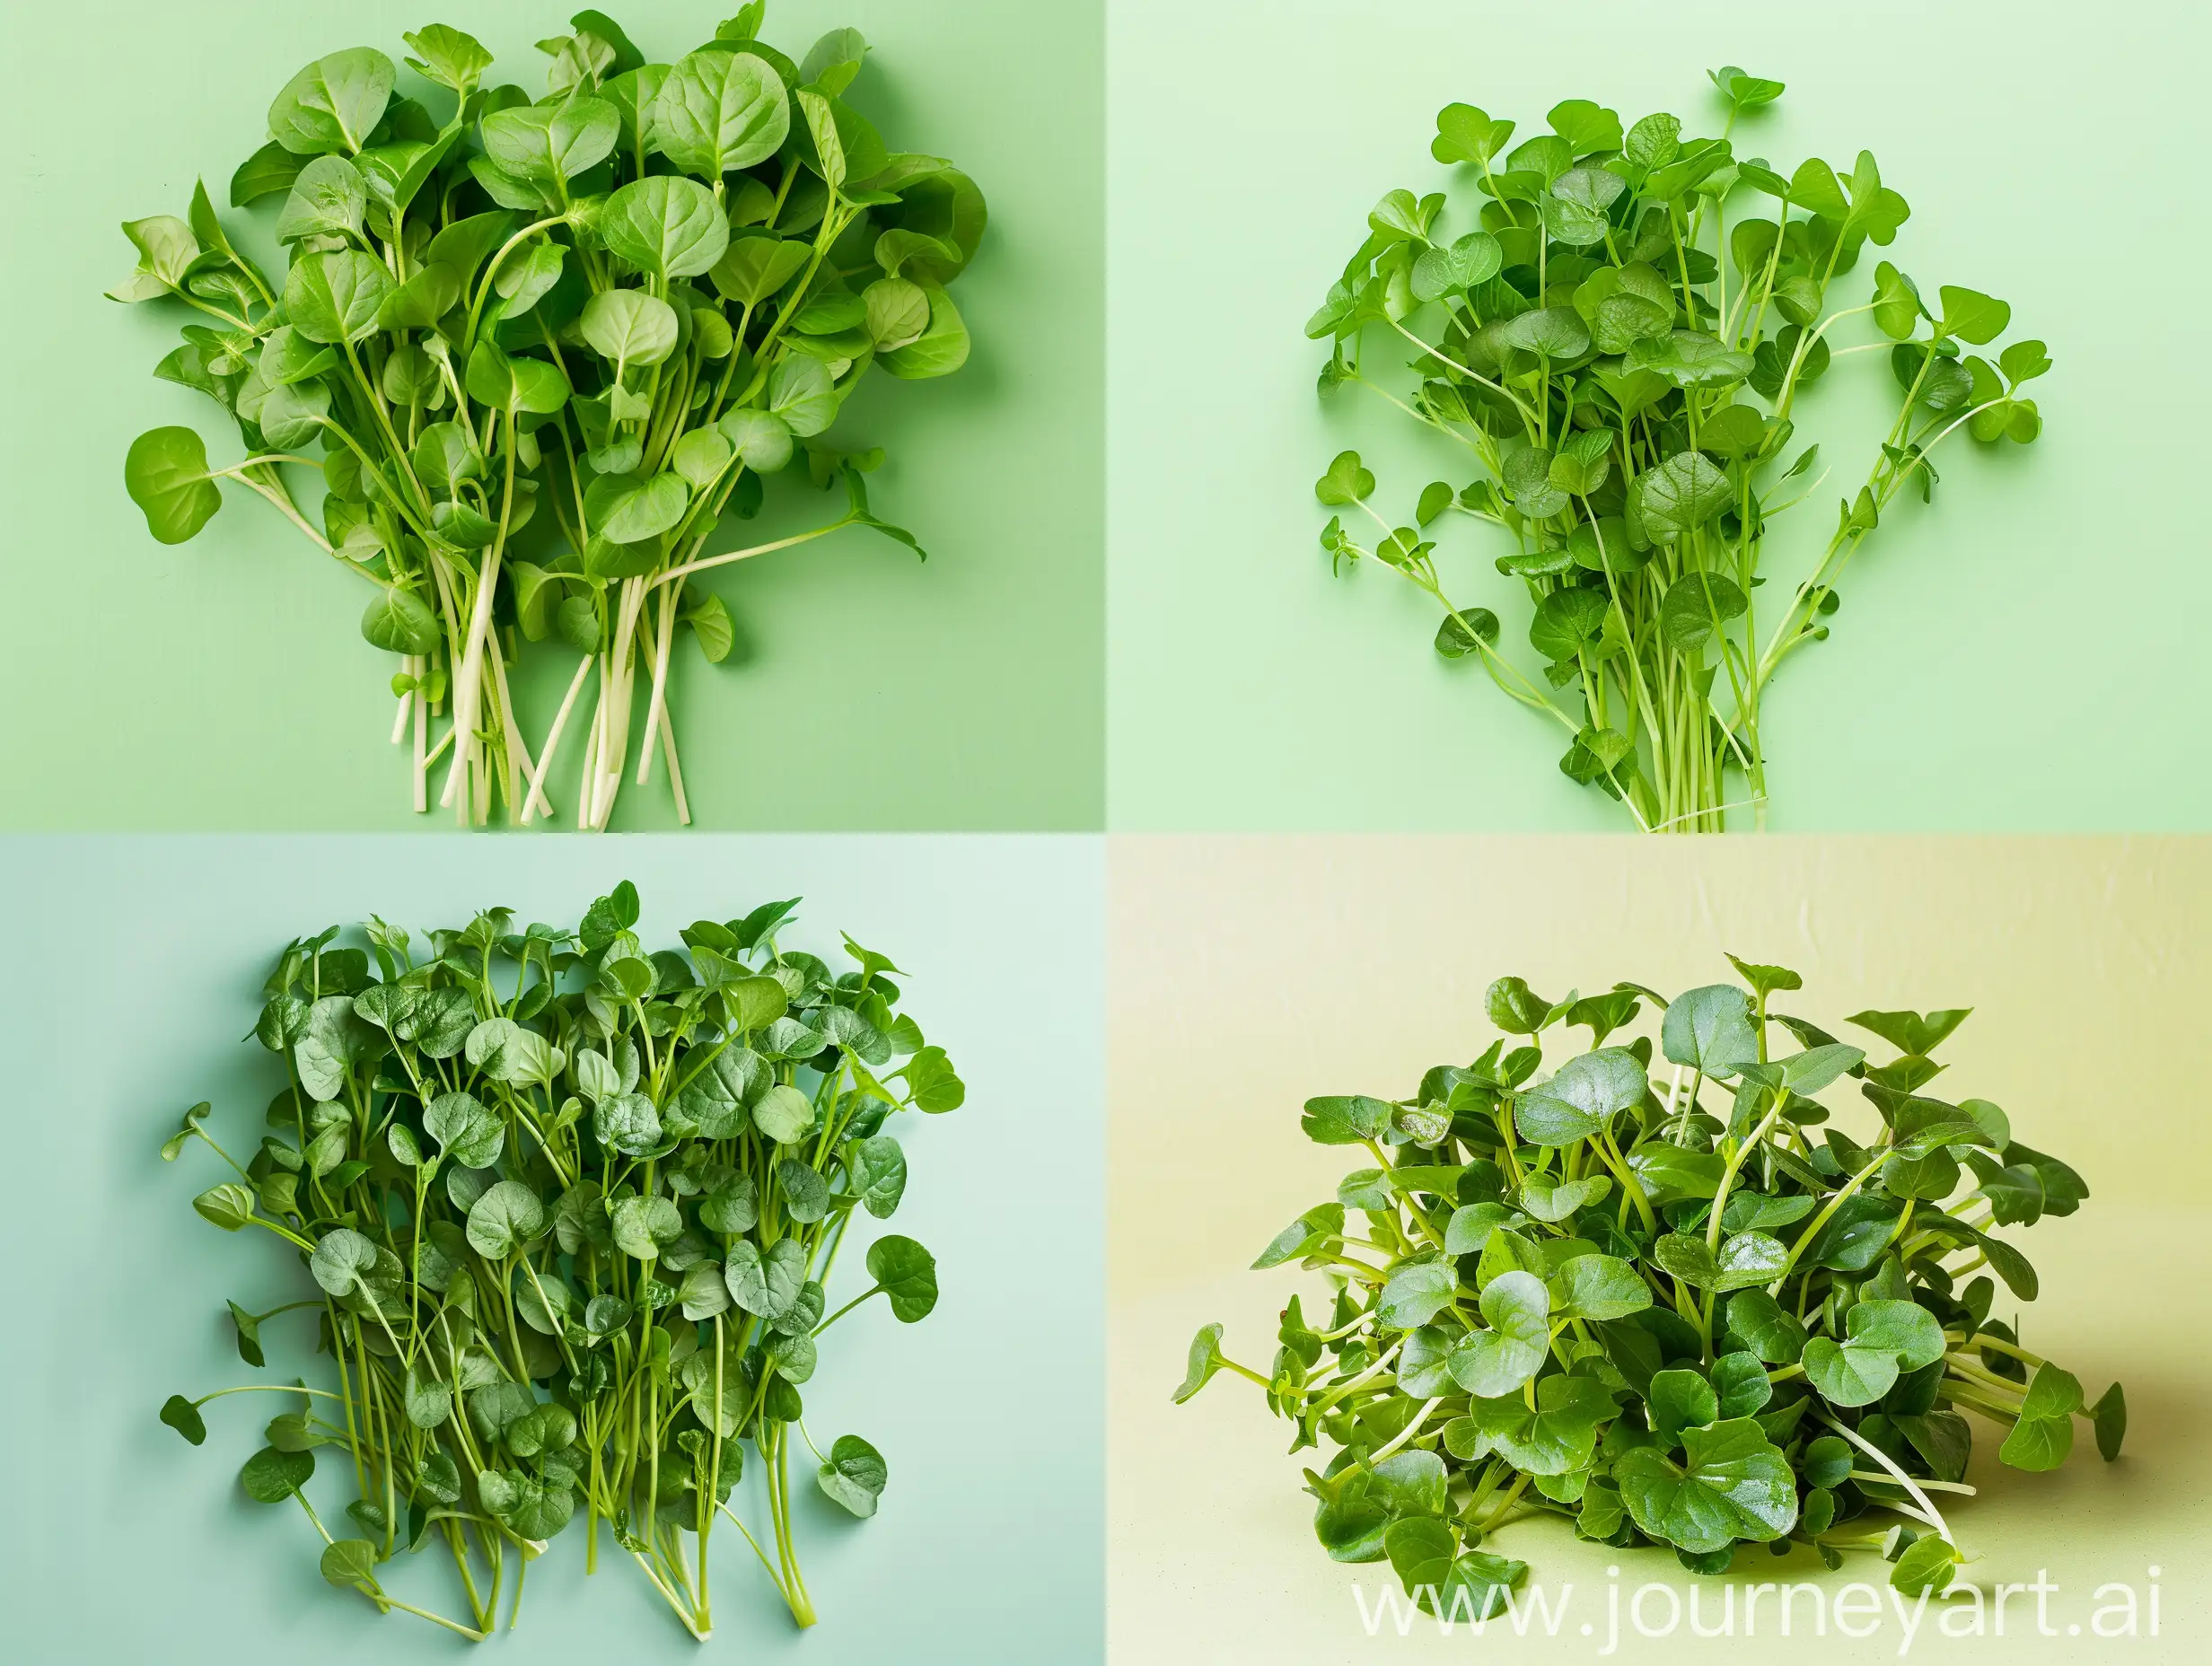 Studio photography with a background of one color of watercress